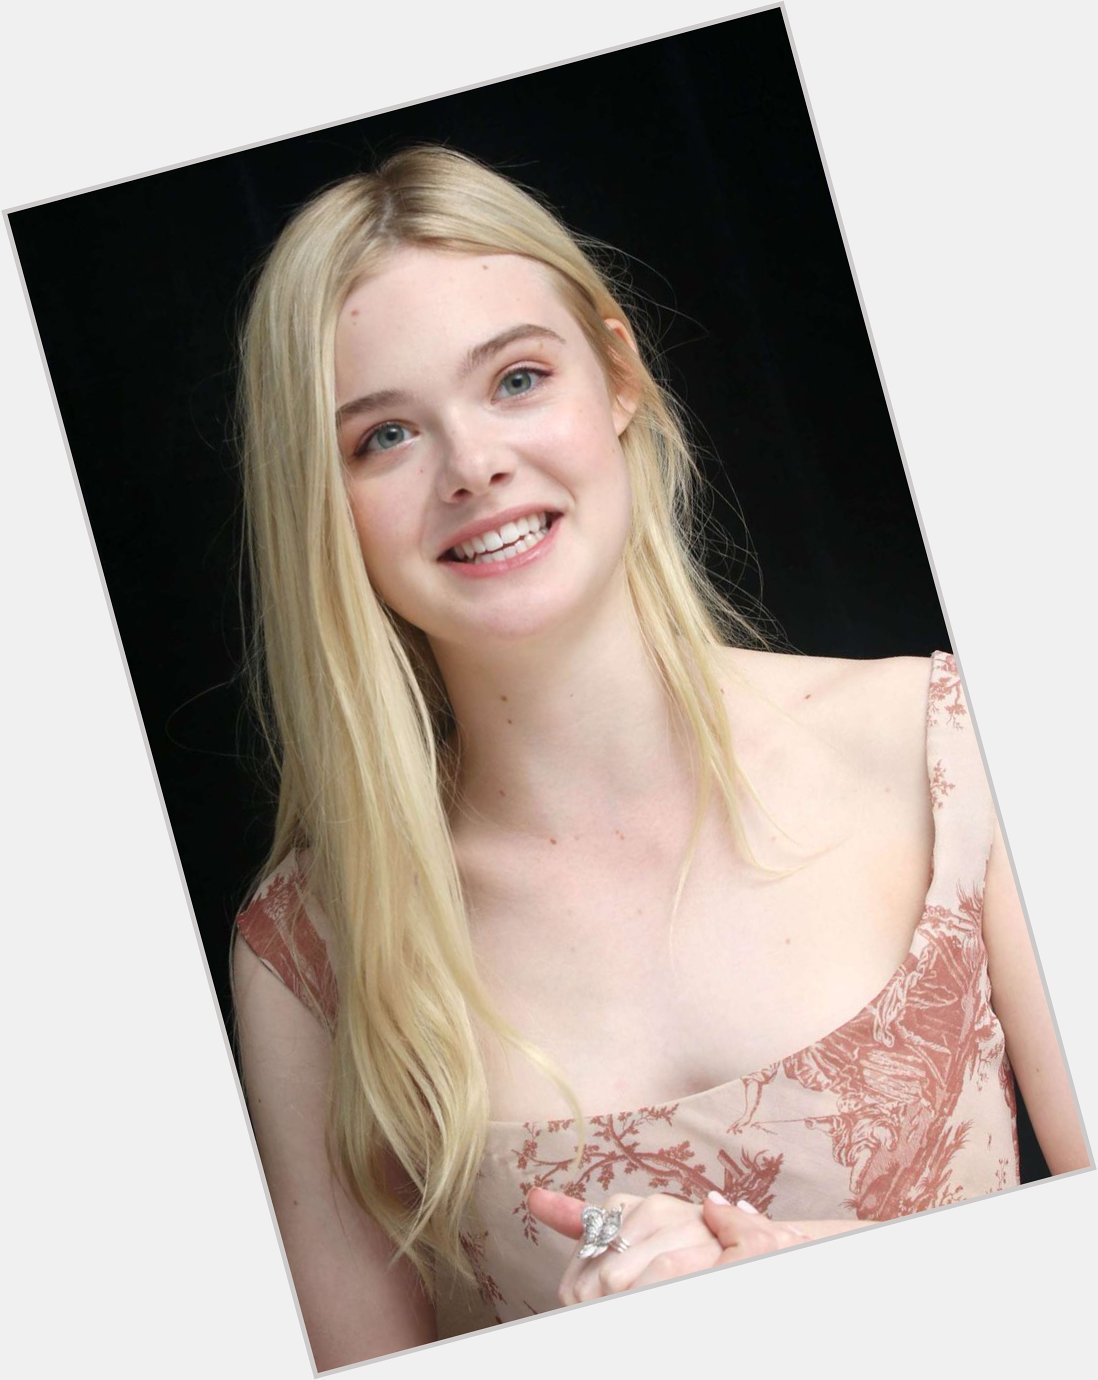 Happy Birthday to the talented and beautiful Elle Fanning. The young actress turns 19 today! 